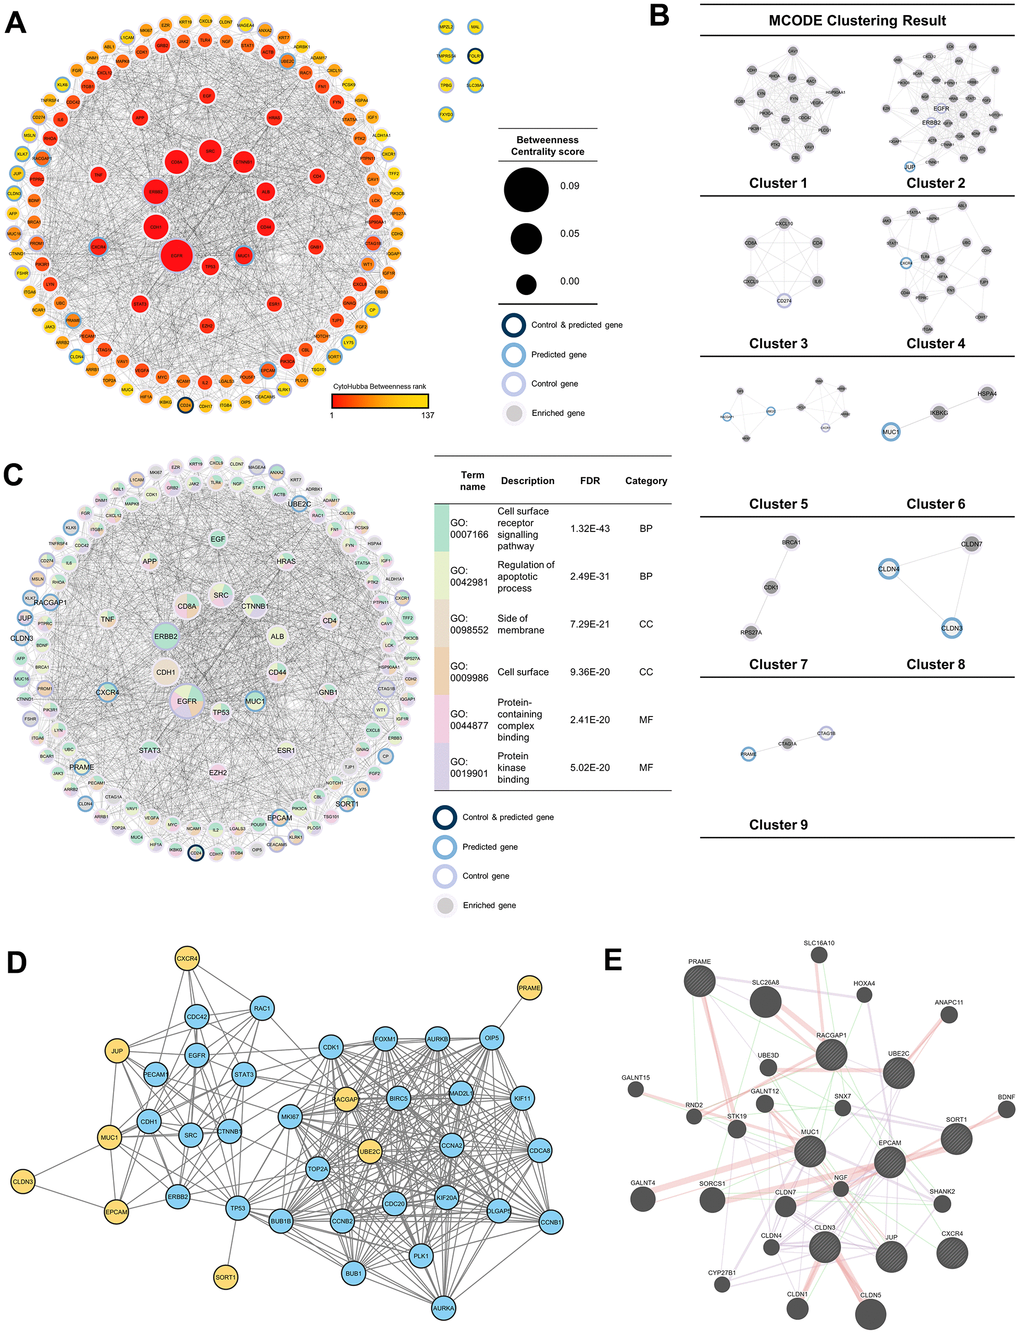 Protein-protein interaction (PPI) network analysis. (A) PPI network of 37 enriched genes (20 control and 17 predicted genes) with 100 genes, which were analyzed with NetworkAnalyzer and CytoHubba for node and edge scoring. Nine genes with the highest betweenness-centrality scores were designated as TAAr. (B) Clustered network with the Molecular Complex Detection (MCODE) algorithm. (C) Gene ontology (GO) terms related to control and predicted genes. (C) GO term related to control and predicted genes. (D) Interaction network of the TAAr gene: yellow genes are TAAr, and blue genes are interactor proteins. (STRING database, high confidence: 0.7). (E) GeneMania network of TAAr. The nine biggest nodes with shading are TAAr genes. Edge width is labeled for confidence scores.